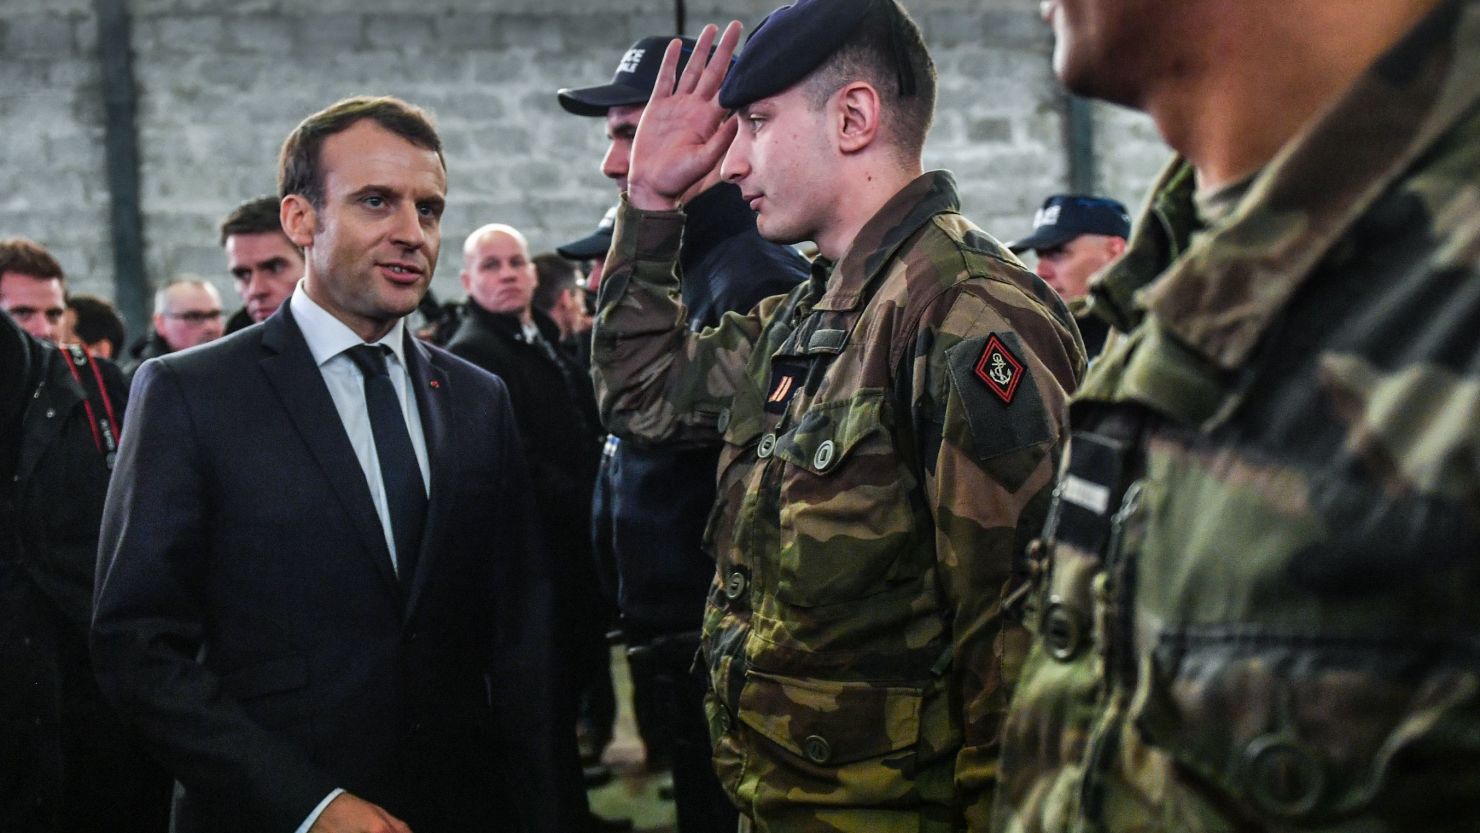 Emmanuel Macron meets security forces during his visit in the French northern city of Calais.